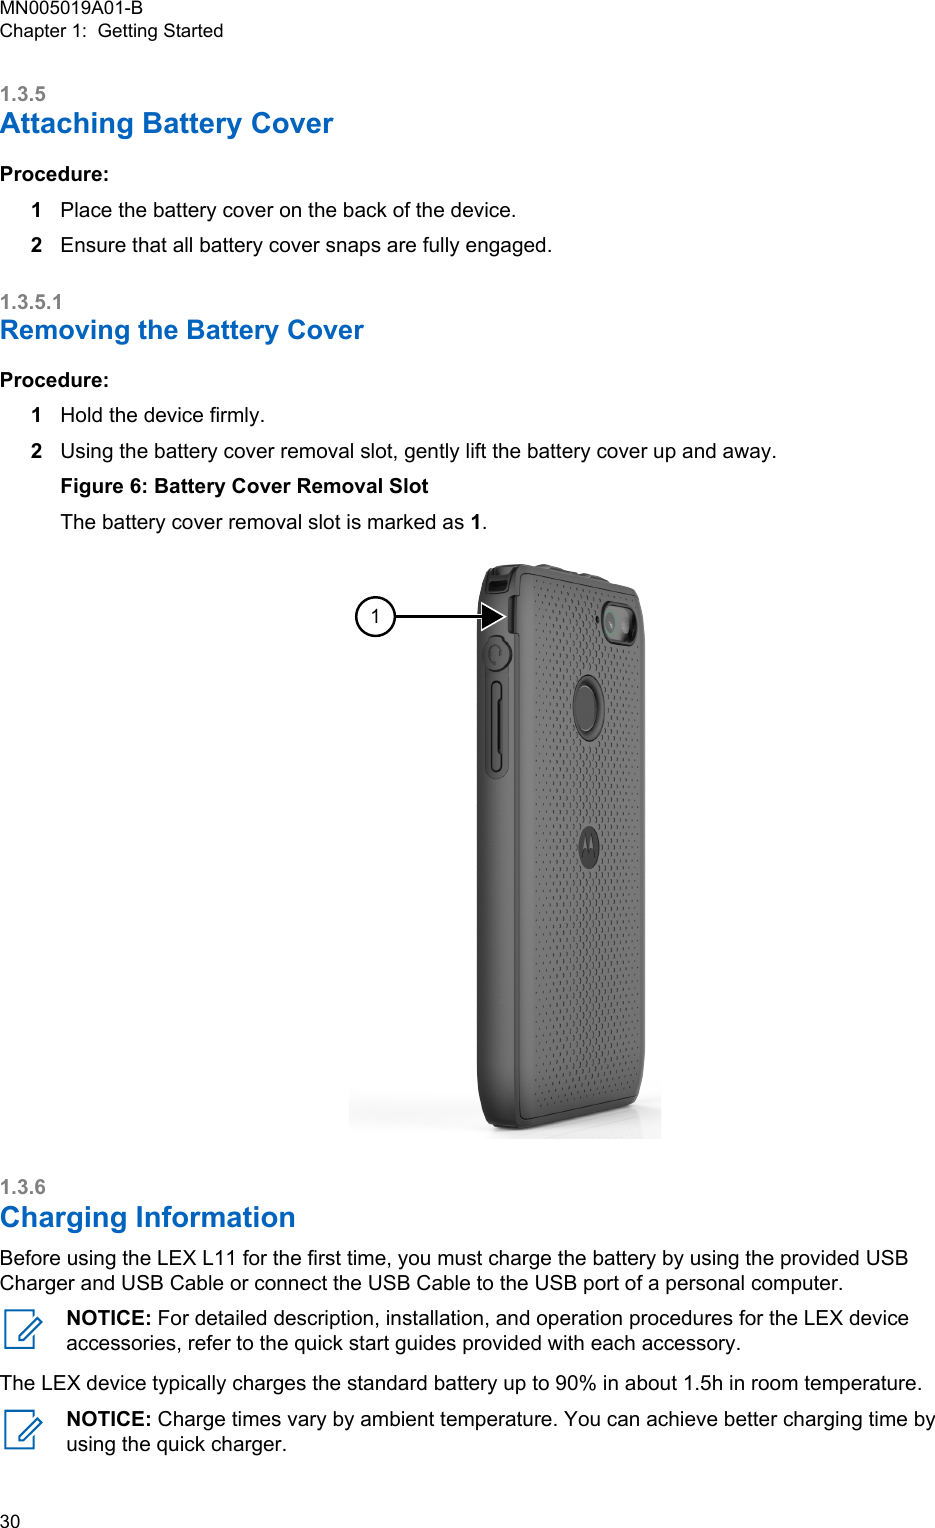 1.3.5Attaching Battery CoverProcedure:1Place the battery cover on the back of the device.2Ensure that all battery cover snaps are fully engaged.1.3.5.1Removing the Battery CoverProcedure:1Hold the device firmly.2Using the battery cover removal slot, gently lift the battery cover up and away.Figure 6: Battery Cover Removal SlotThe battery cover removal slot is marked as 1.11.3.6Charging InformationBefore using the LEX L11 for the first time, you must charge the battery by using the provided USBCharger and USB Cable or connect the USB Cable to the USB port of a personal computer.NOTICE: For detailed description, installation, and operation procedures for the LEX deviceaccessories, refer to the quick start guides provided with each accessory.The LEX device typically charges the standard battery up to 90% in about 1.5h in room temperature.NOTICE: Charge times vary by ambient temperature. You can achieve better charging time byusing the quick charger.MN005019A01-BChapter 1:  Getting Started30  